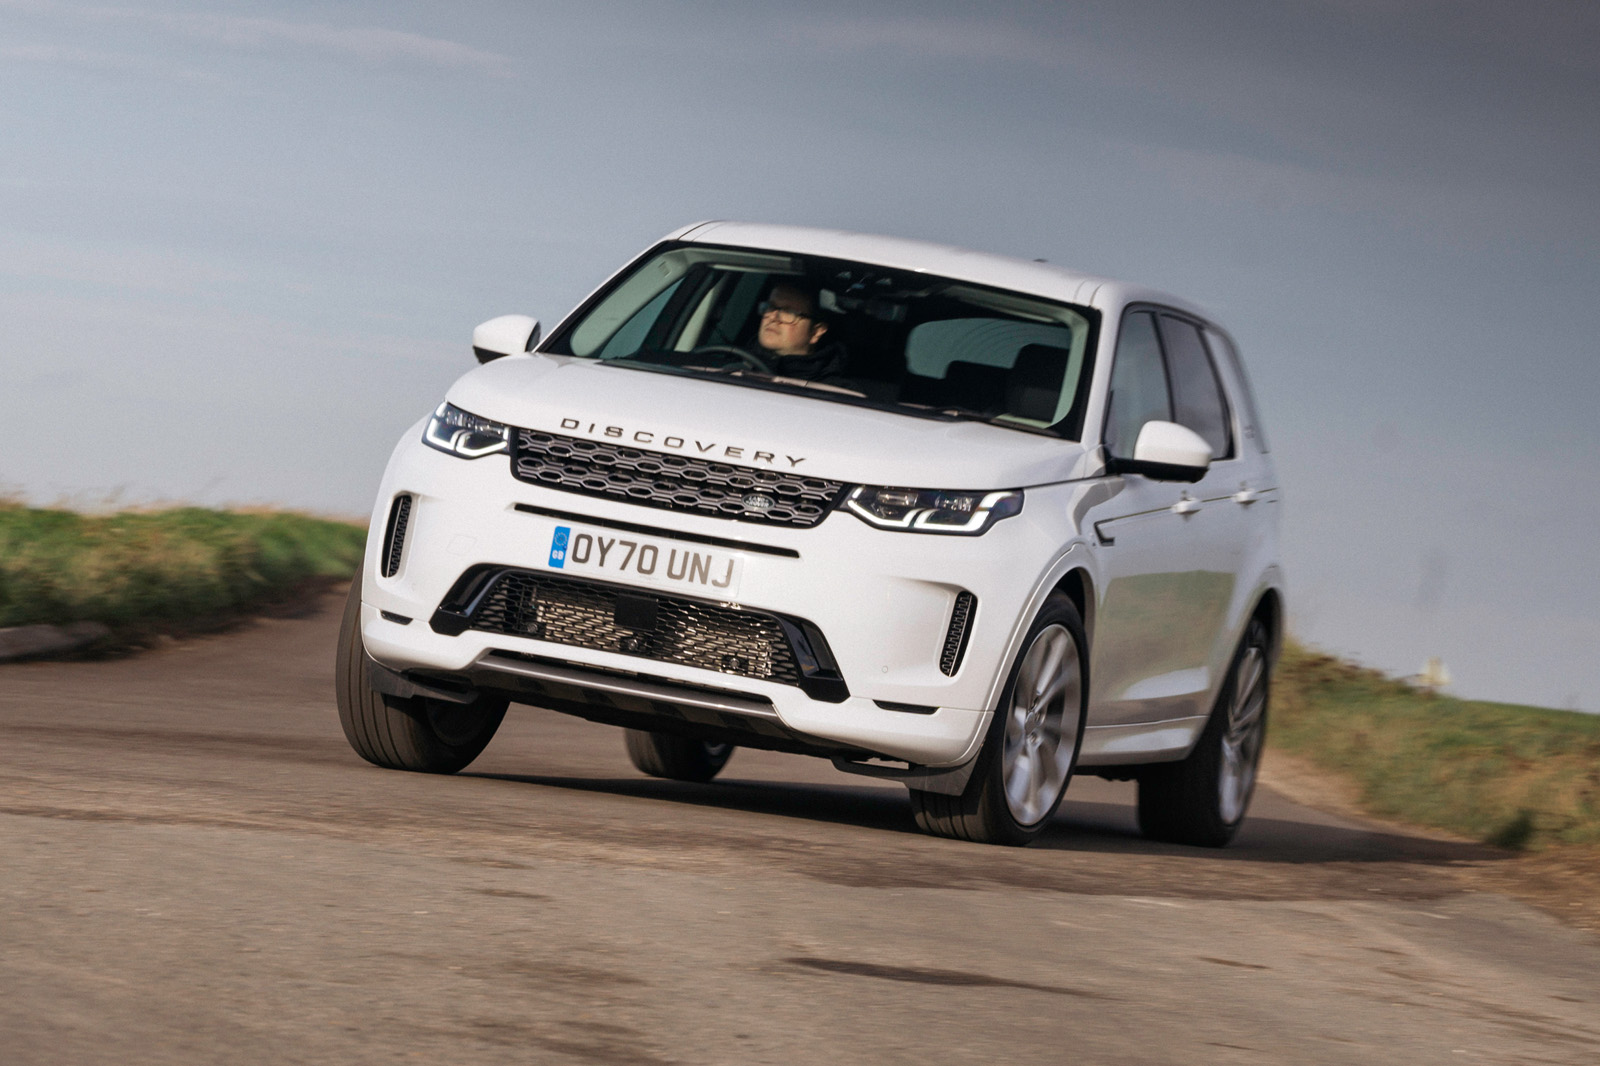 https://www.autocar.co.uk/sites/autocar.co.uk/files/images/car-reviews/first-drives/legacy/1-land-rover-discovery-p300e-2021-uk-fd-hero-front.jpg